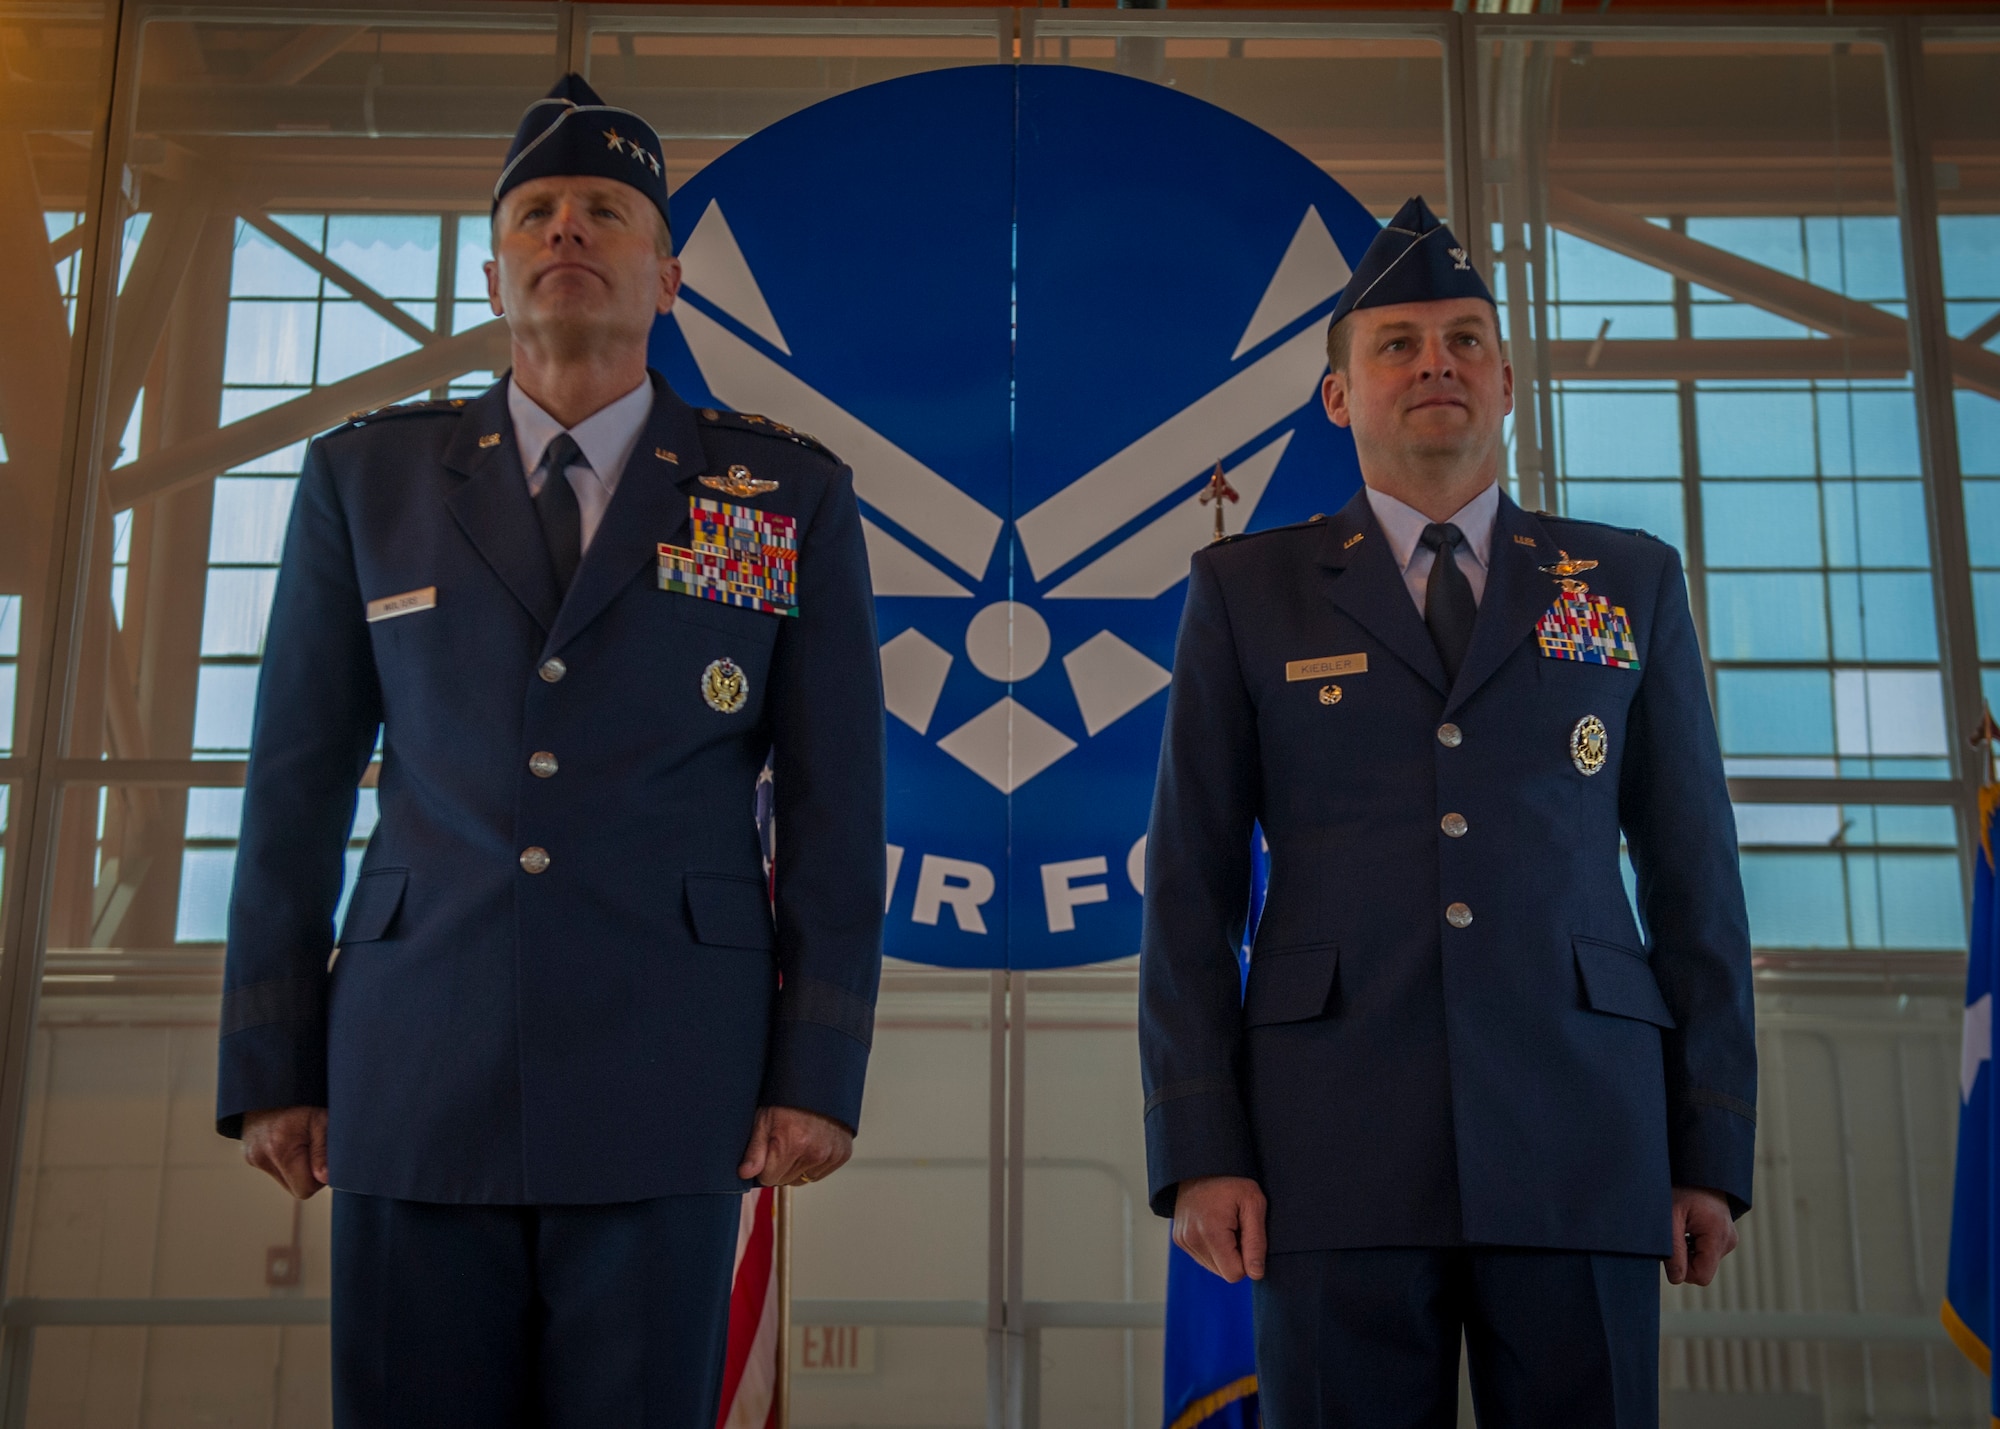 Lieutenant General Tod D. Wolters, 12th Air Force (Air Forces Southern) commander, and Col. Robert Kiebler, upcoming 49th Wing commander, stand while Ruffles and Flourishes are played for the arrival of the official party during an assumption of command ceremony at Holloman Air Force Base, N.M., July 18. Wolters visited Holloman to officiate Kiebler’s assumption of command of the 49th Wing. (U.S. Air Force photo by Airman 1st Class Aaron Montoya / Released)